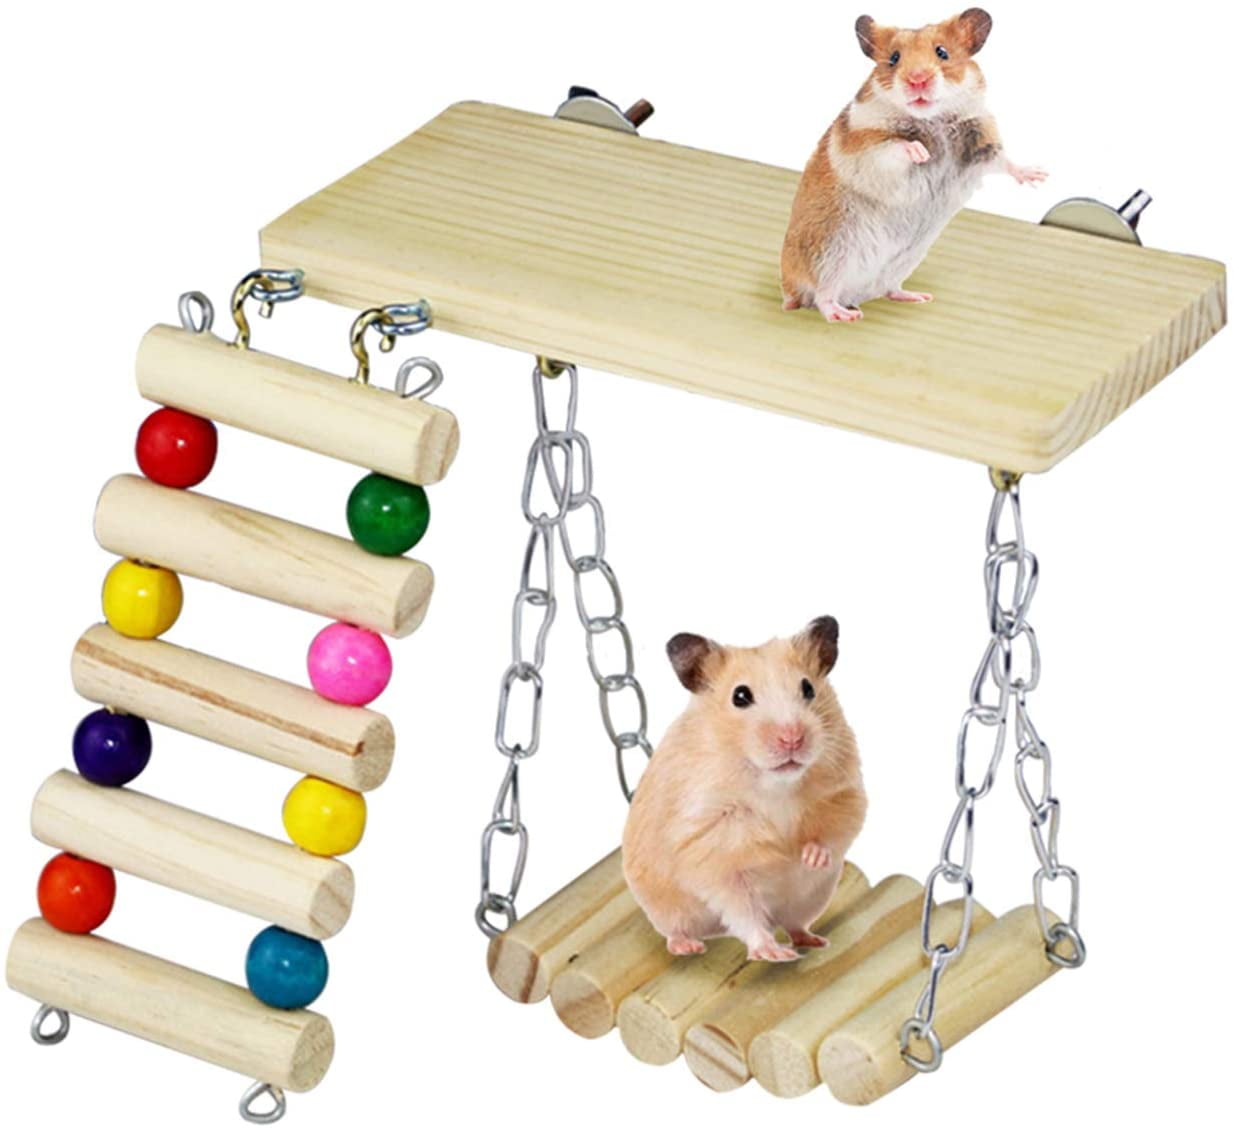 Rats Hamster Toys Wooden Hammock Swing Seesaw Gnawing Climbing Place Houses D 